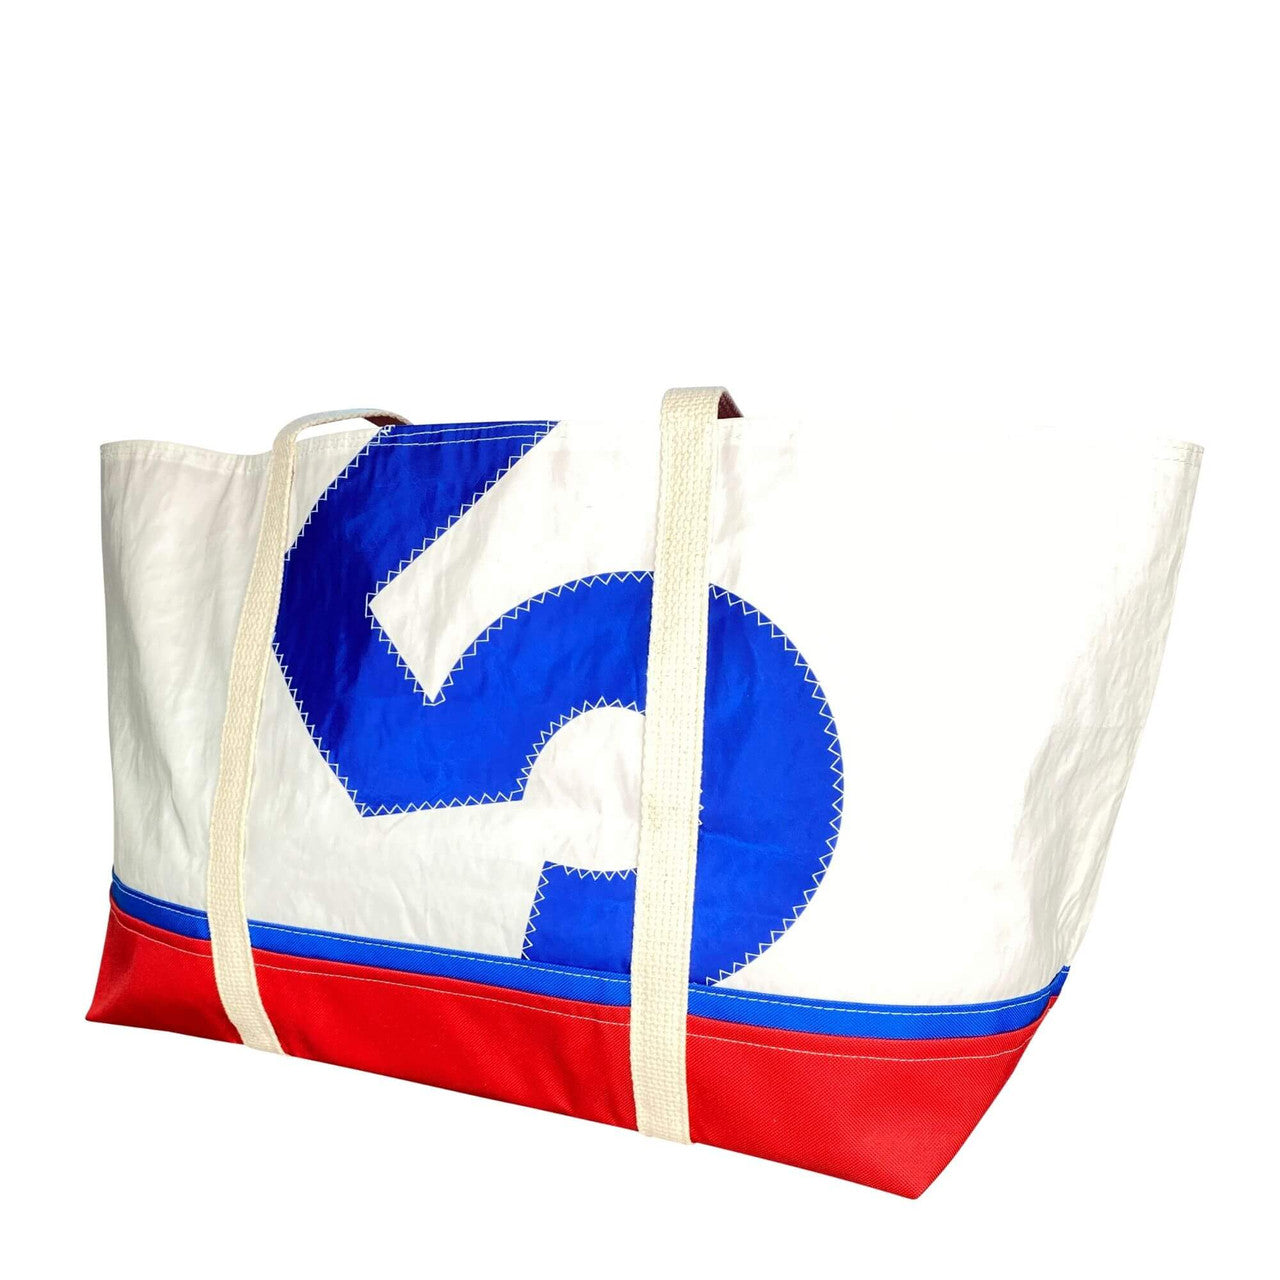 Recycled Sail Bag, Tote Bag Handmade from Sails, Blue & Red Handbags New England Trading Co   